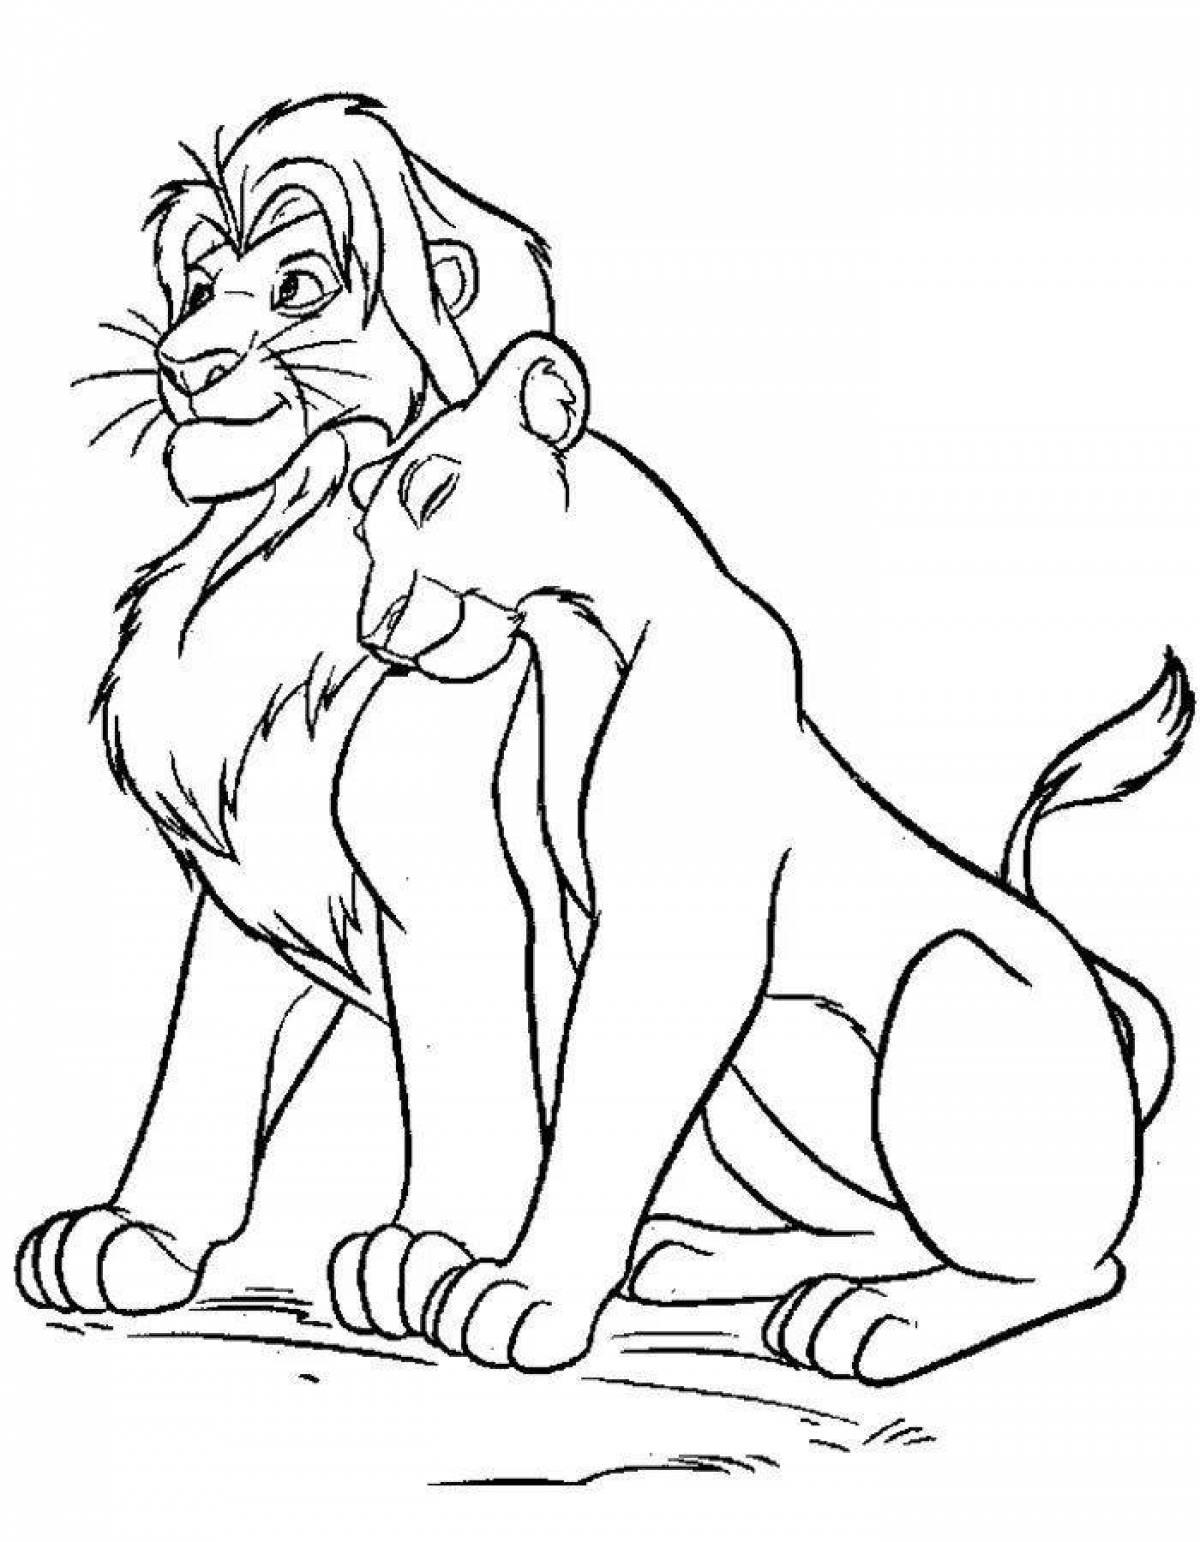 Lion from the lion king #1